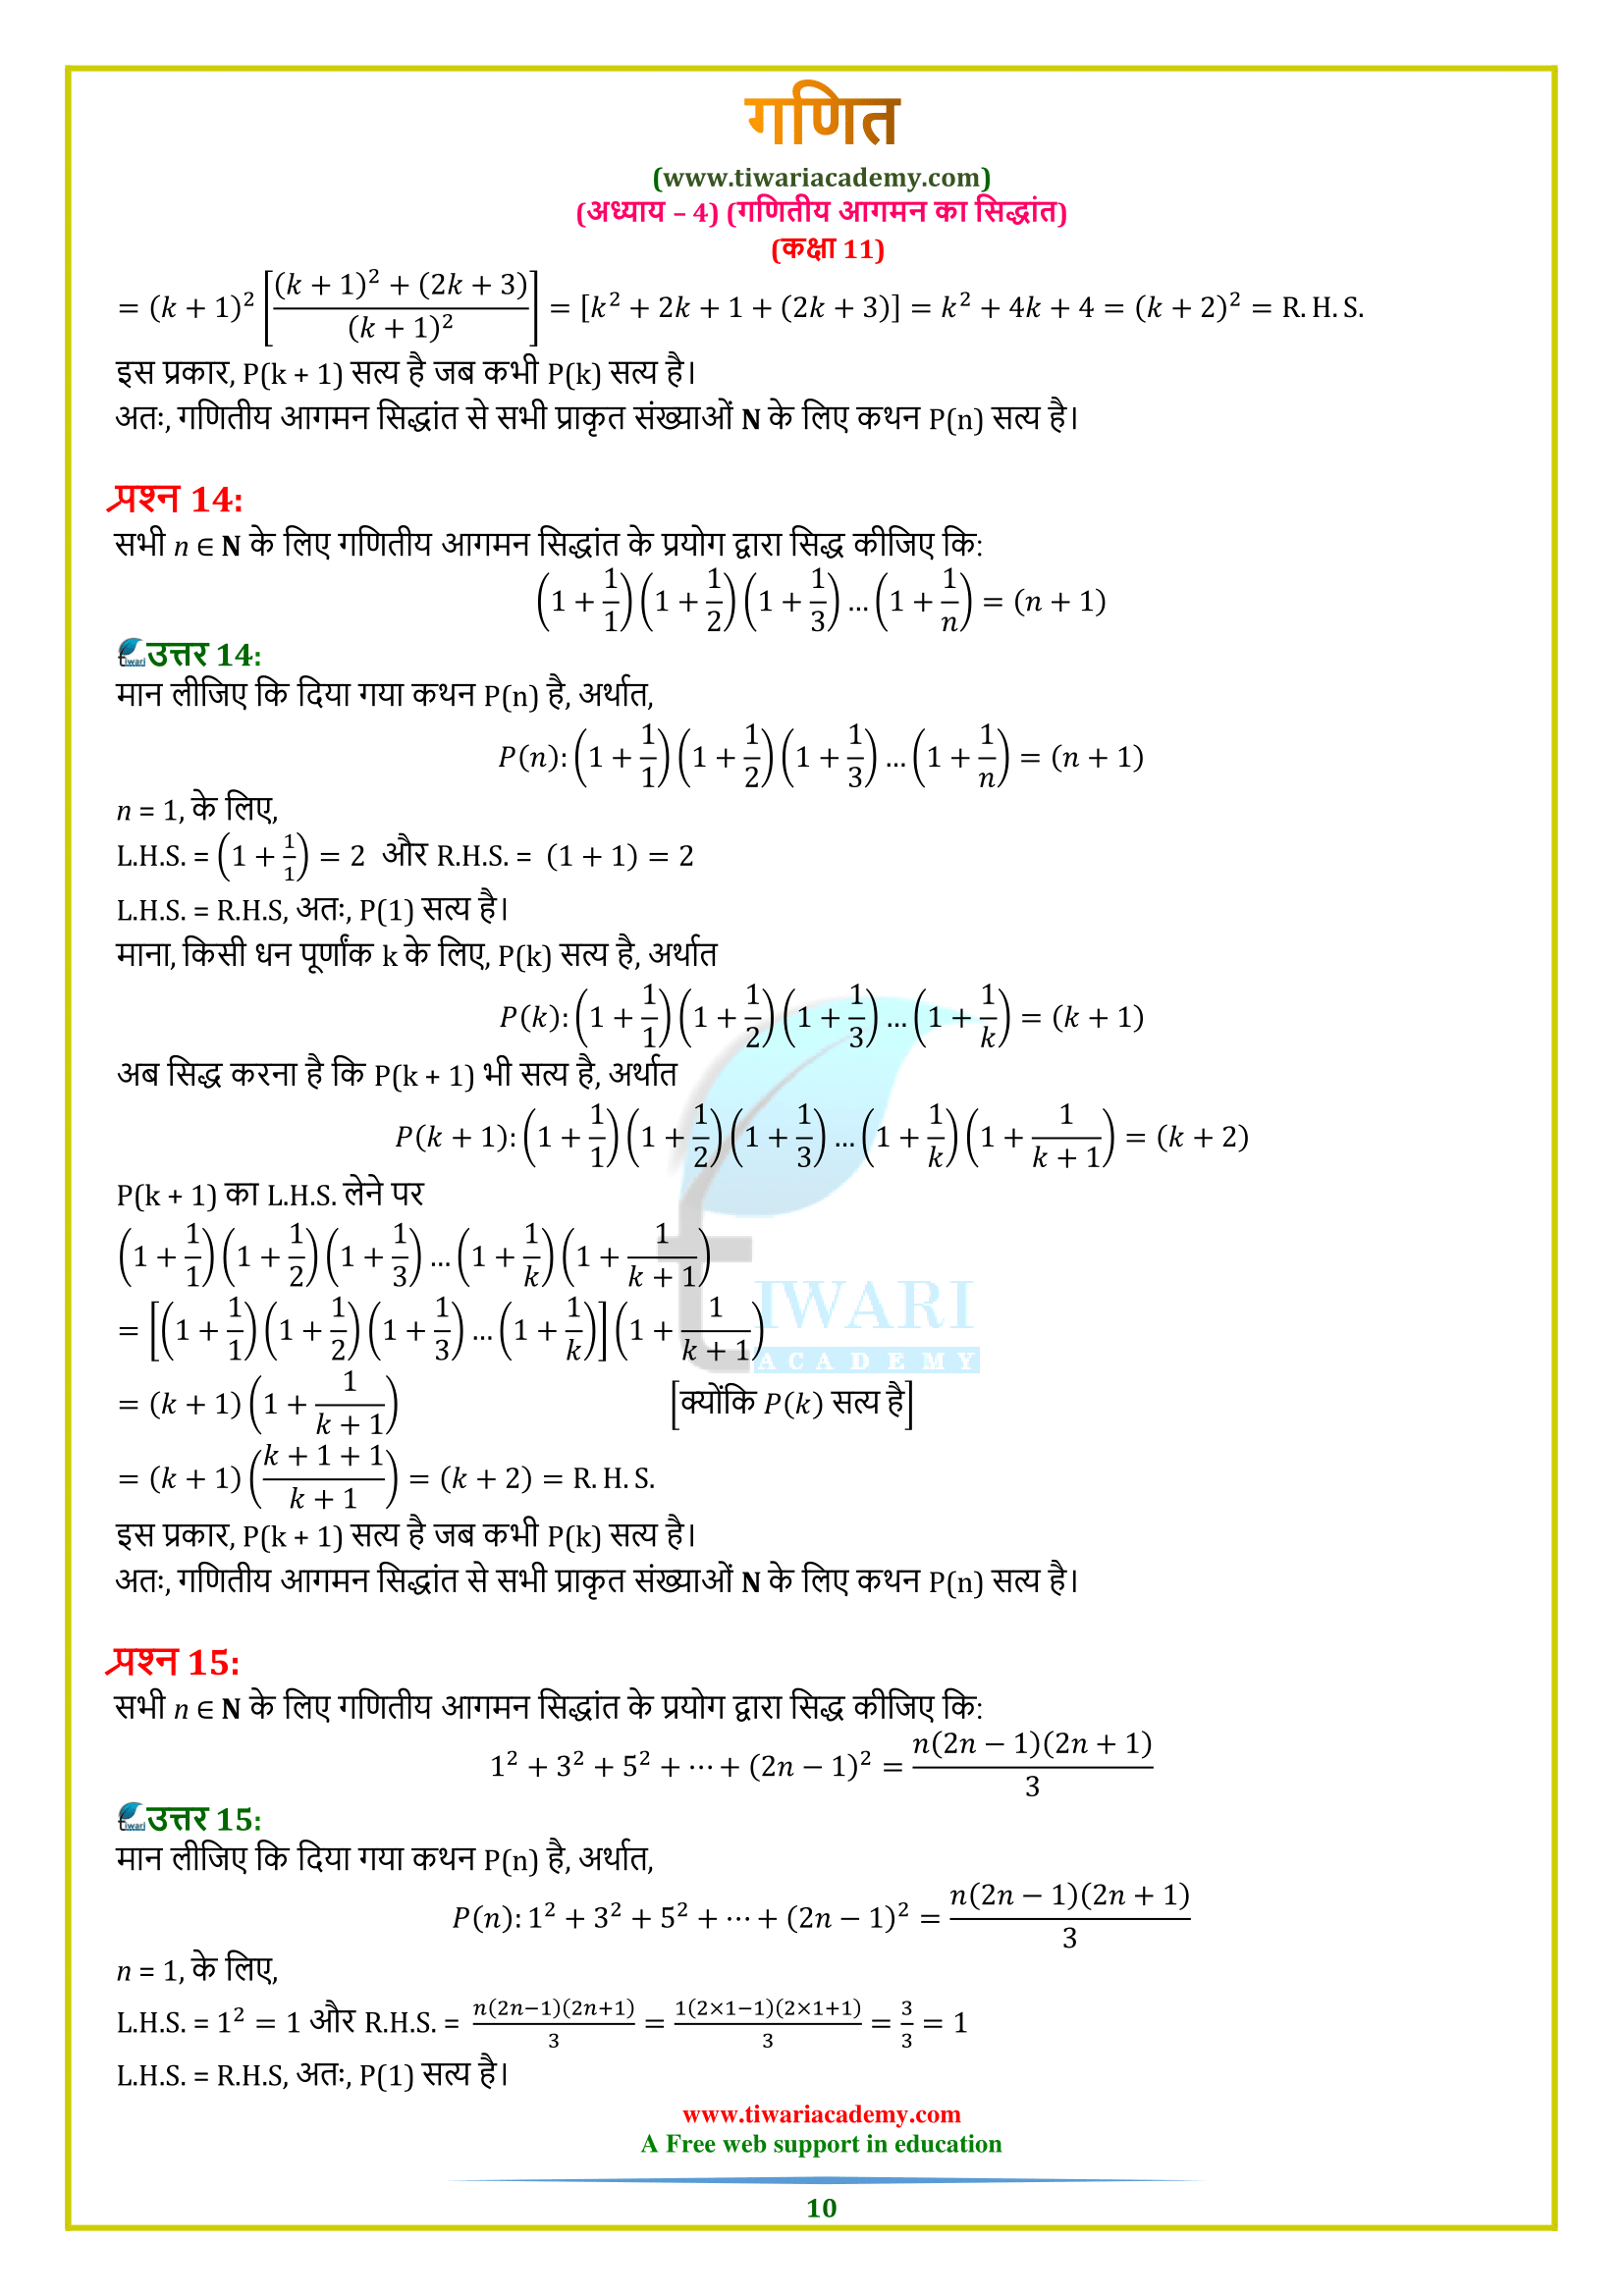 Class 11 Maths Chapter 4 Exercise 4.1 in pdf solutions